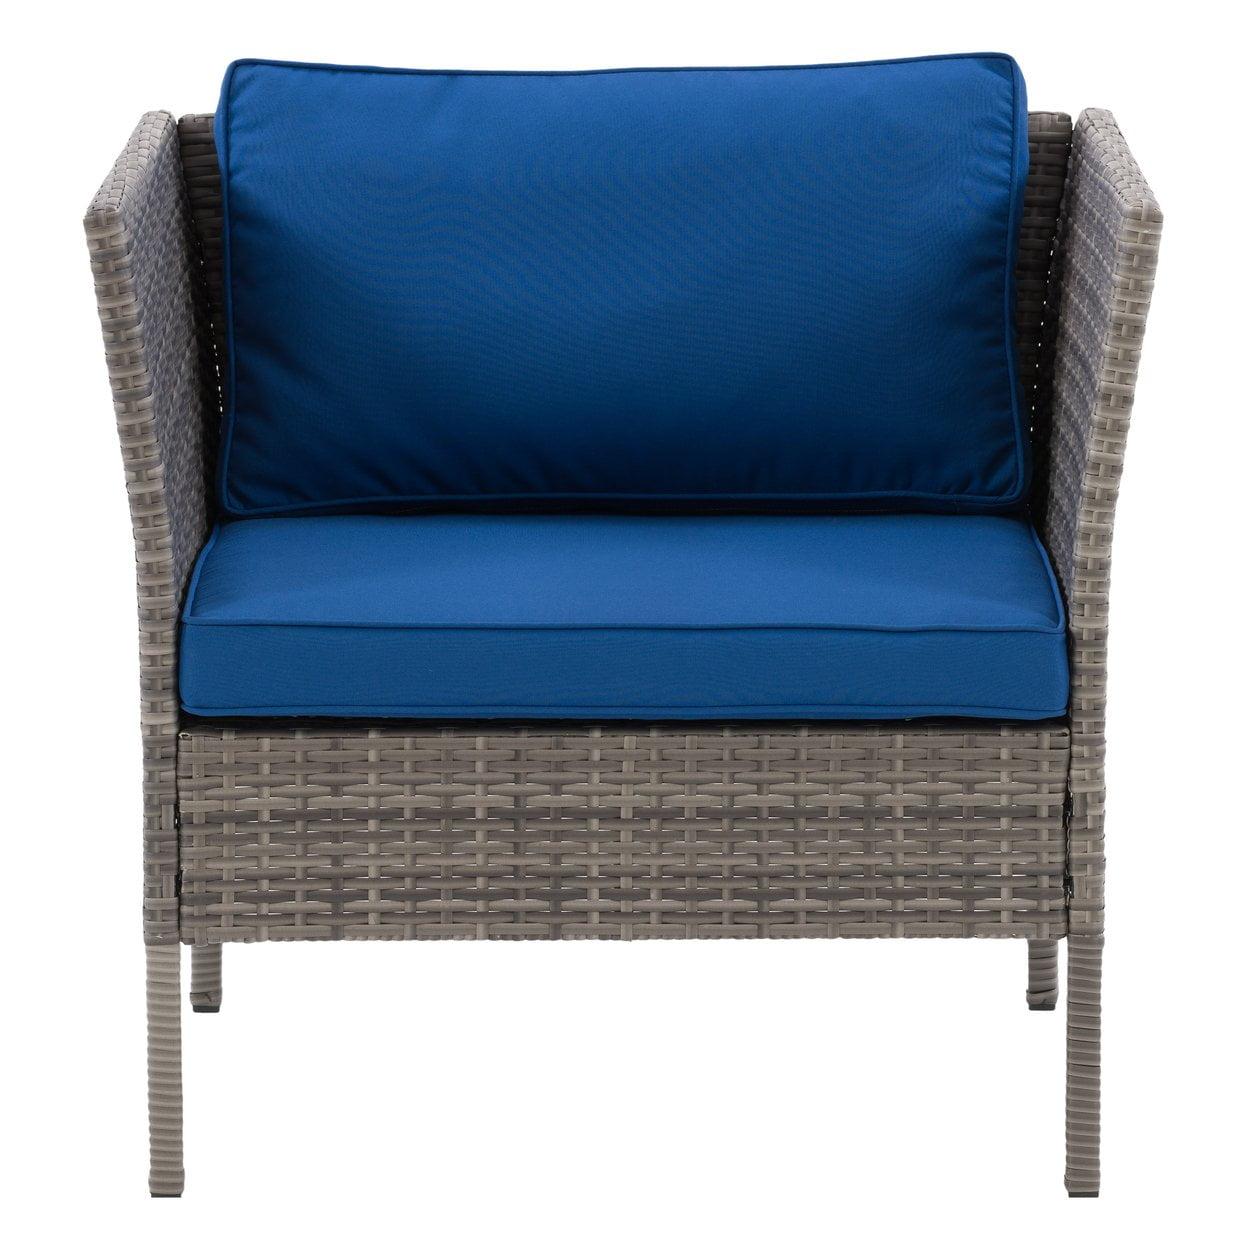 CorLiving 27'' Powder-Coated Steel Patio Armchair with Plush Blue Cushions